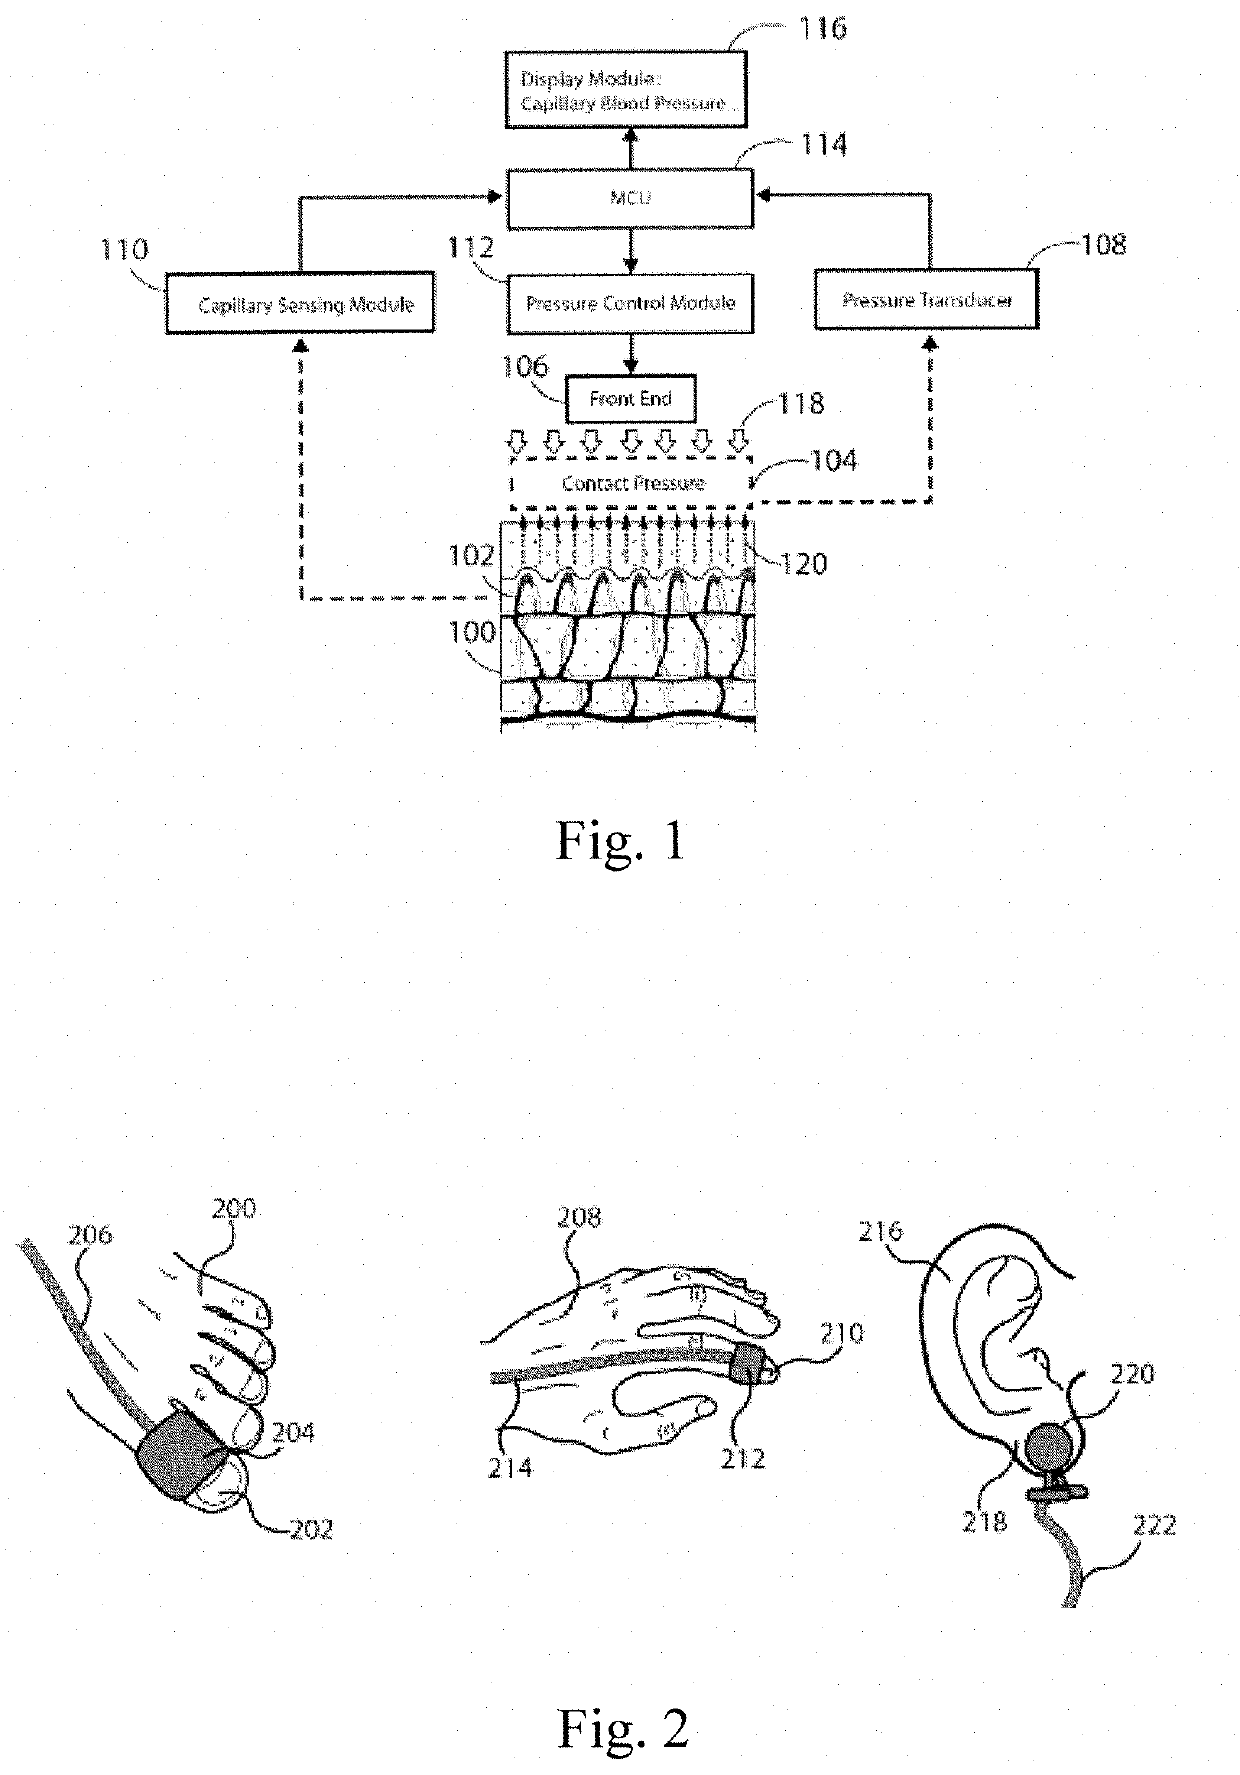 Devices and methods for non-invasive capillary blood pressure measurement